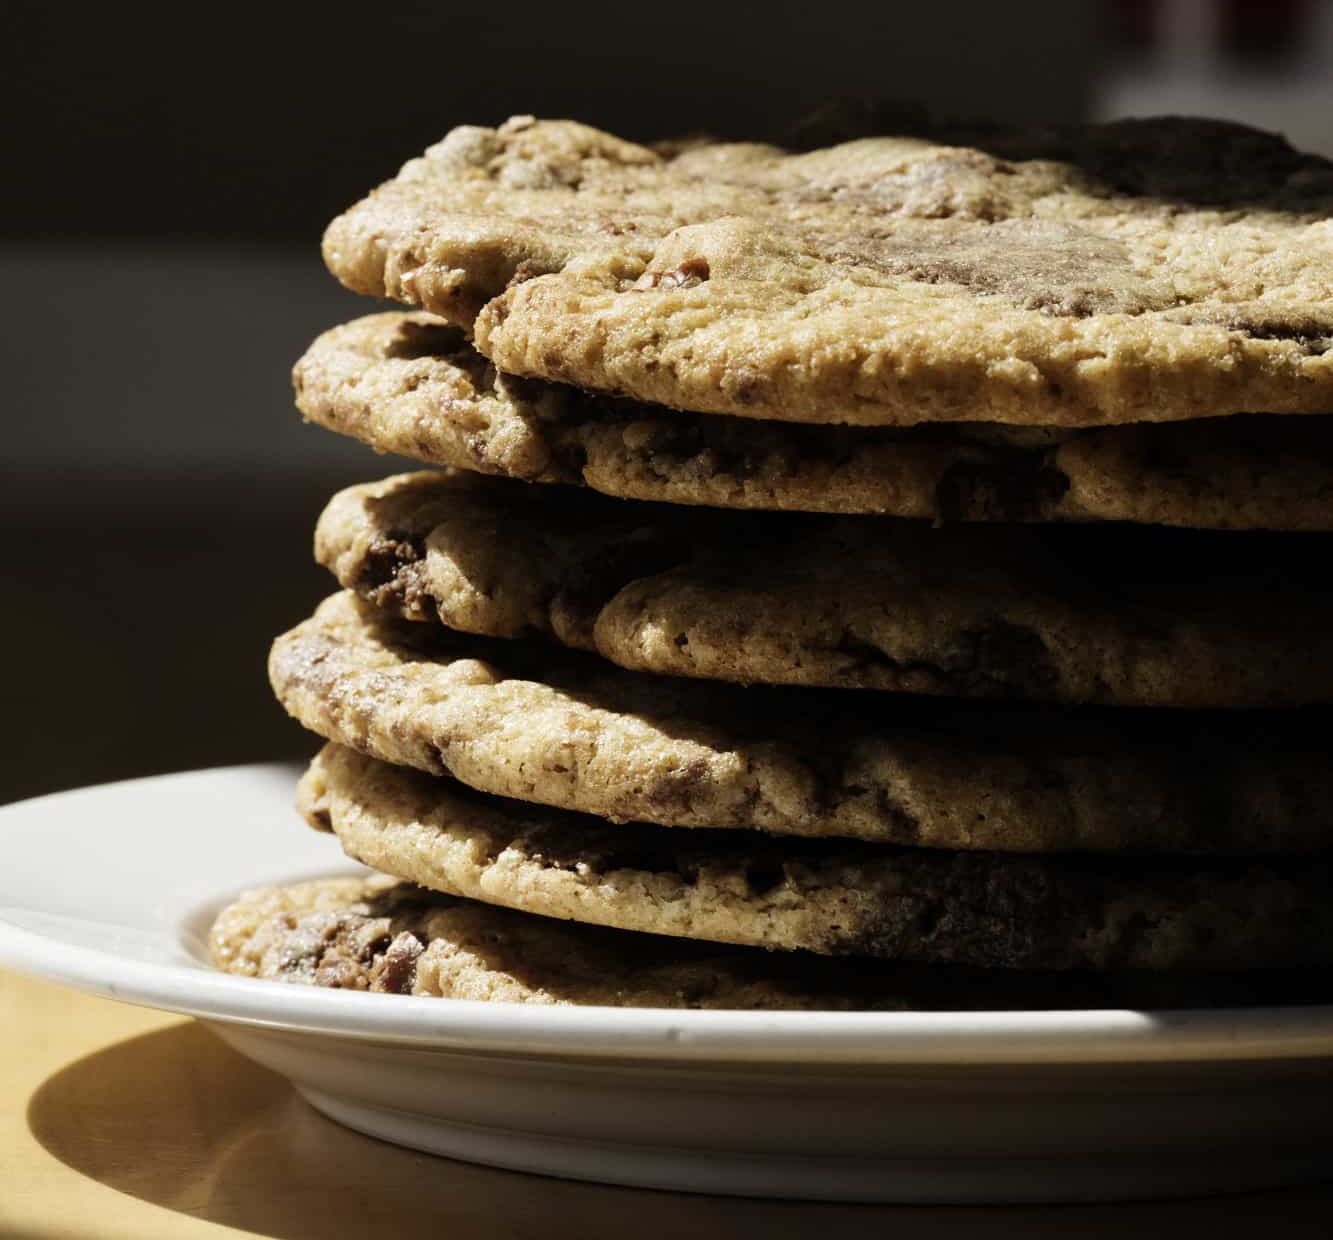 A stack of warm chocolate chip cookies from yum! Kitchen and Bakery